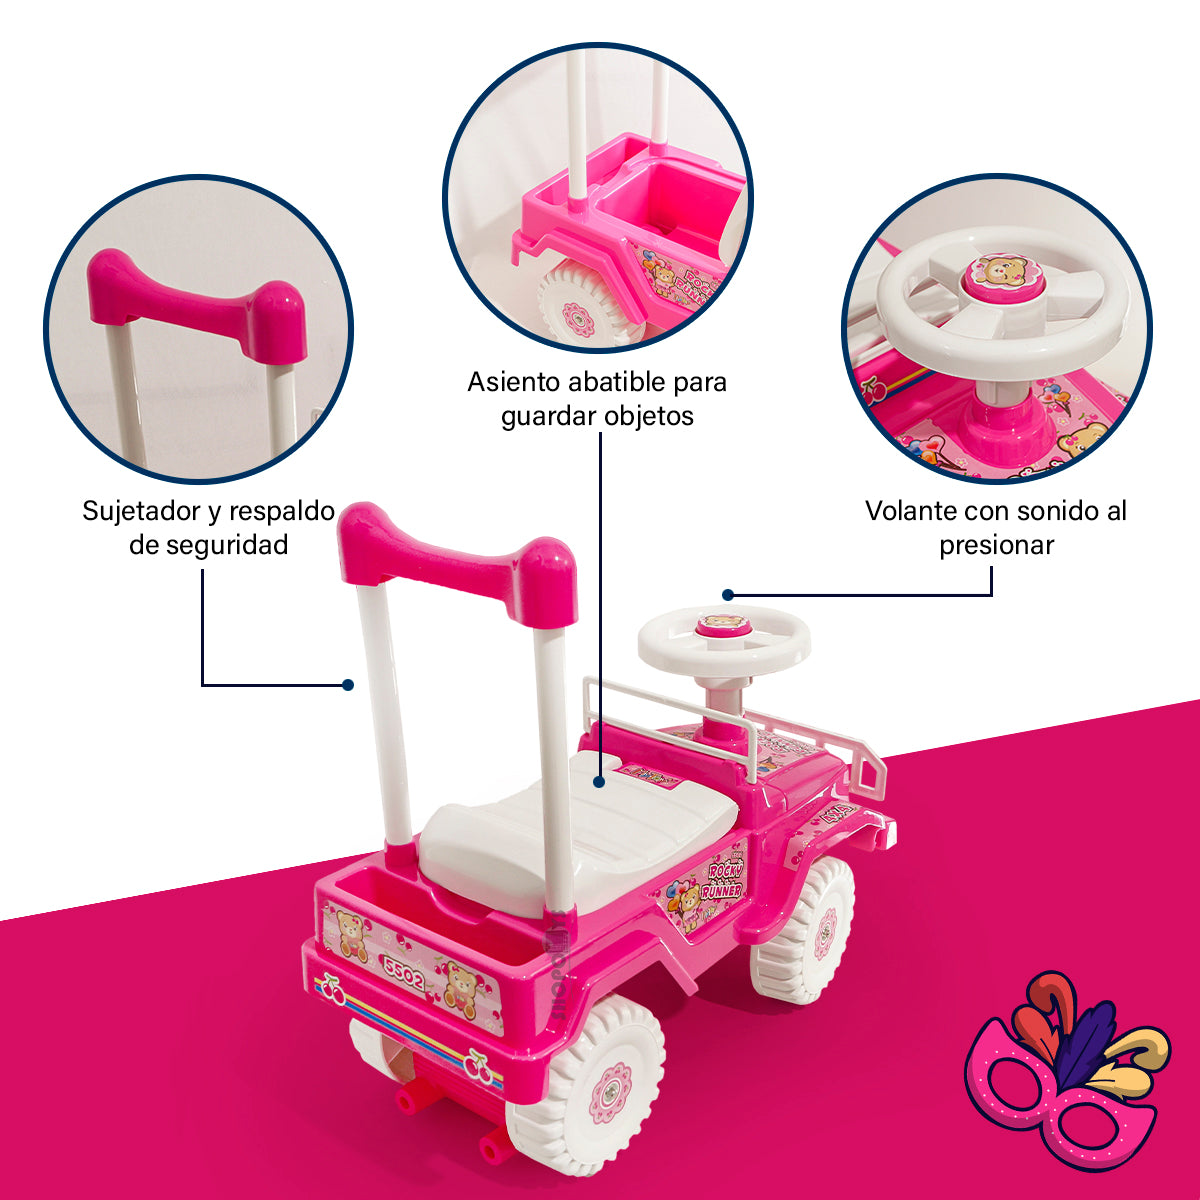 Carrito Montable Jeep con Sonido Rocky Runner Mytoy